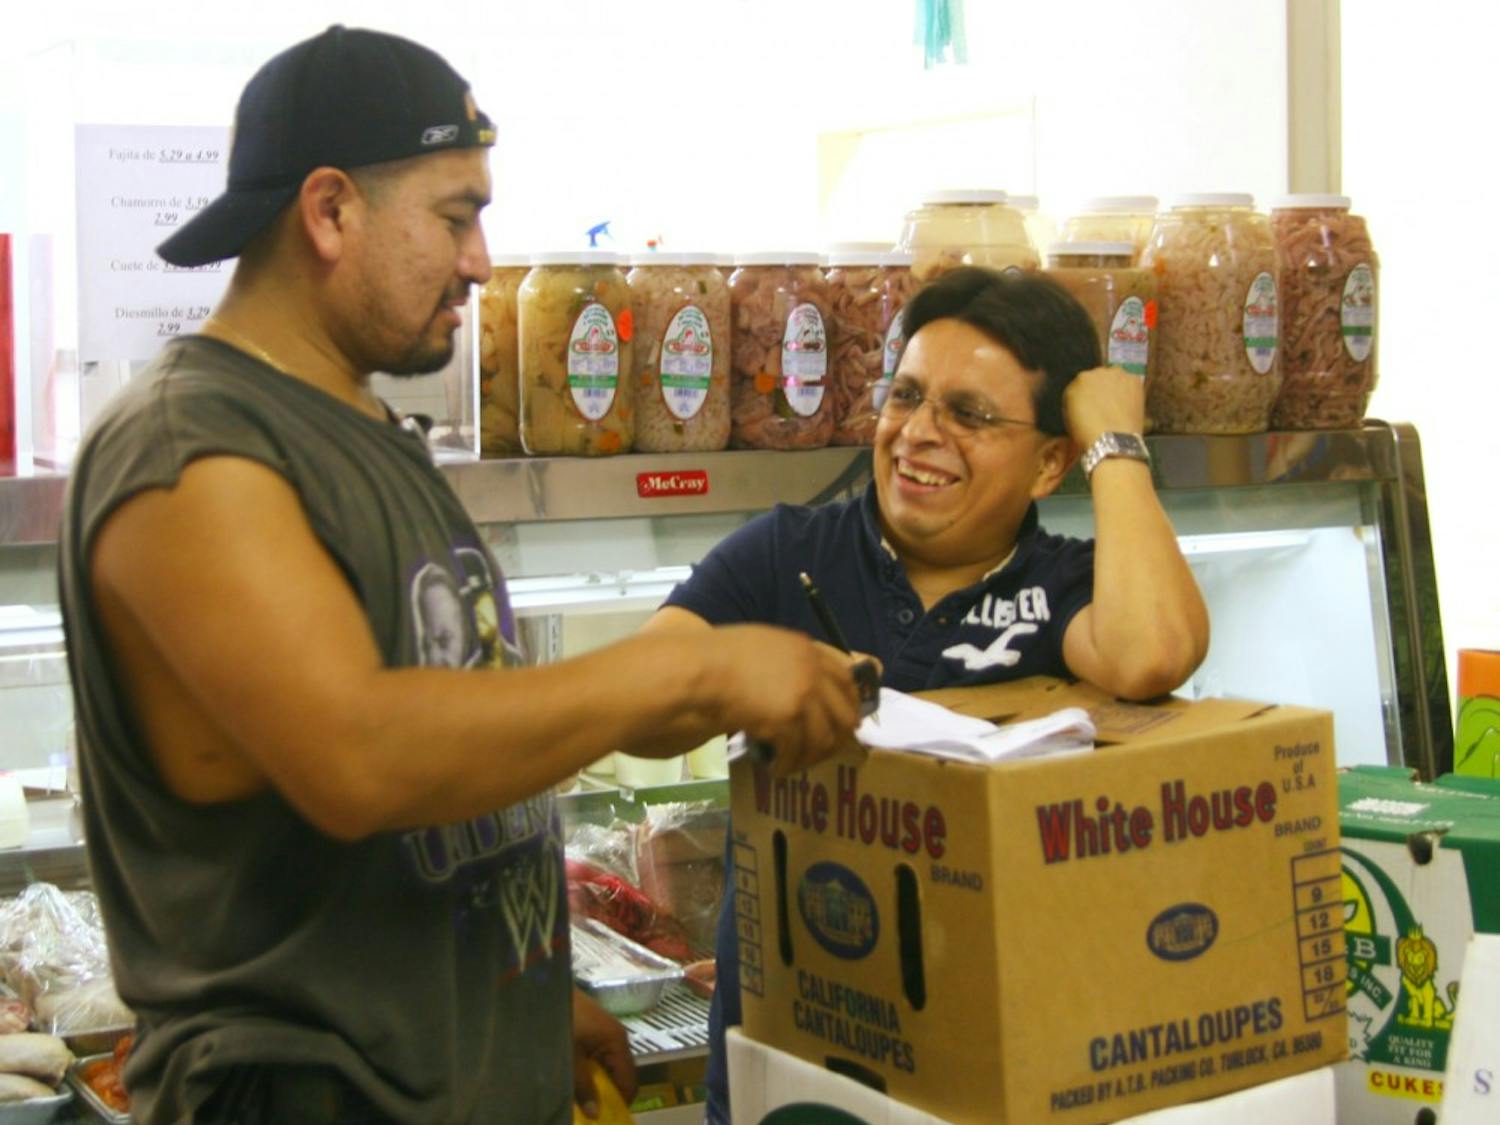 David Hernandez delivers a package and talks with Raymundo Arenas, employee of La Potosina, a Latino market on Rosemary Street.